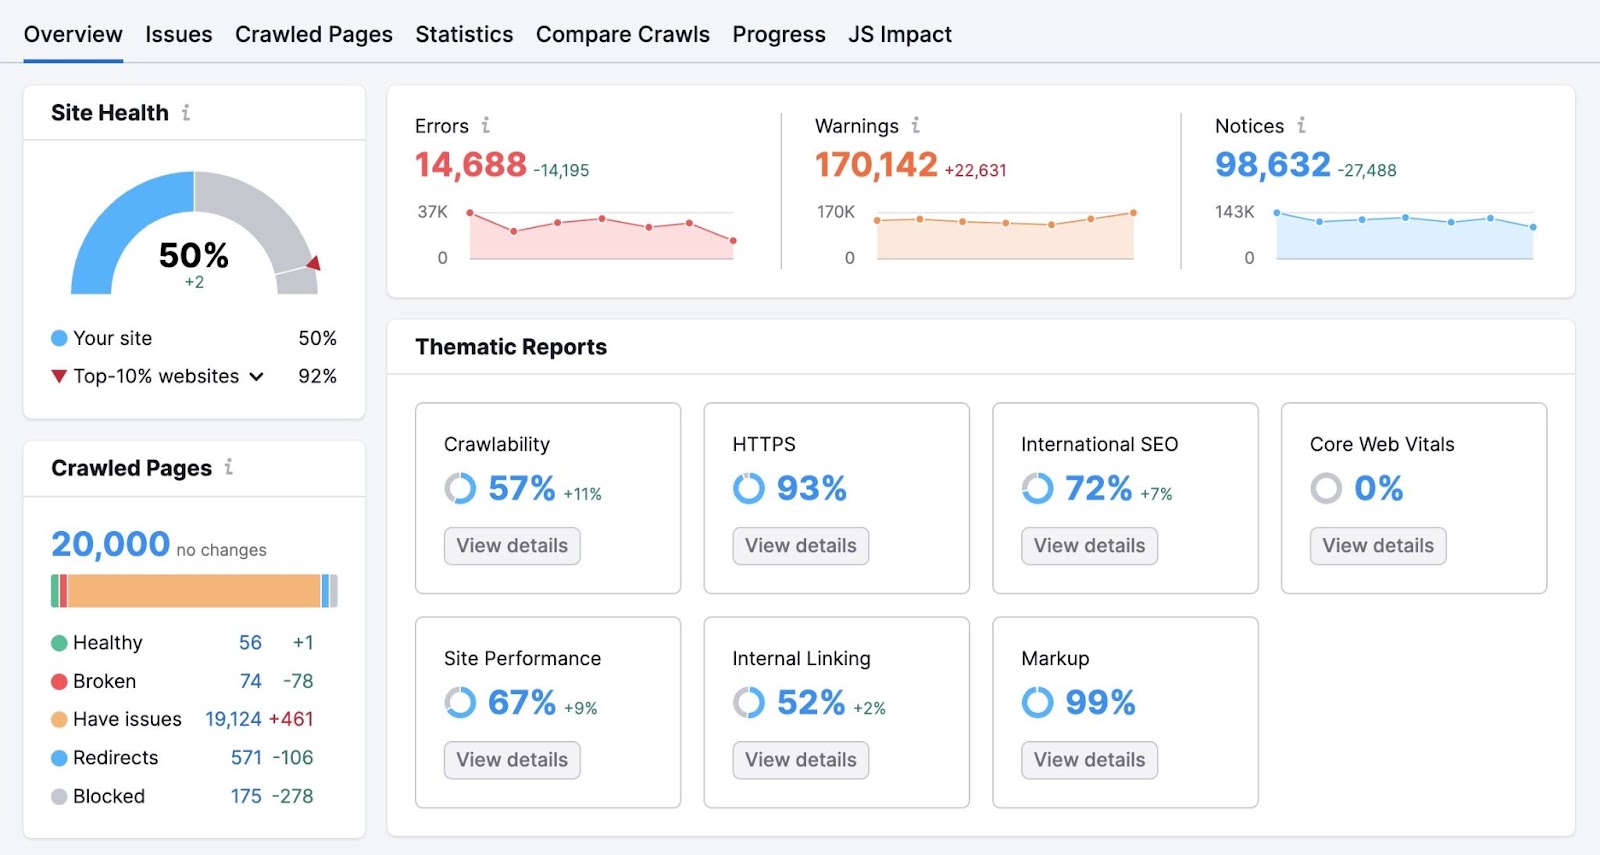 "Site Audit" overview showing site health & performance metrics along with errors, warnings, and notices on a website.